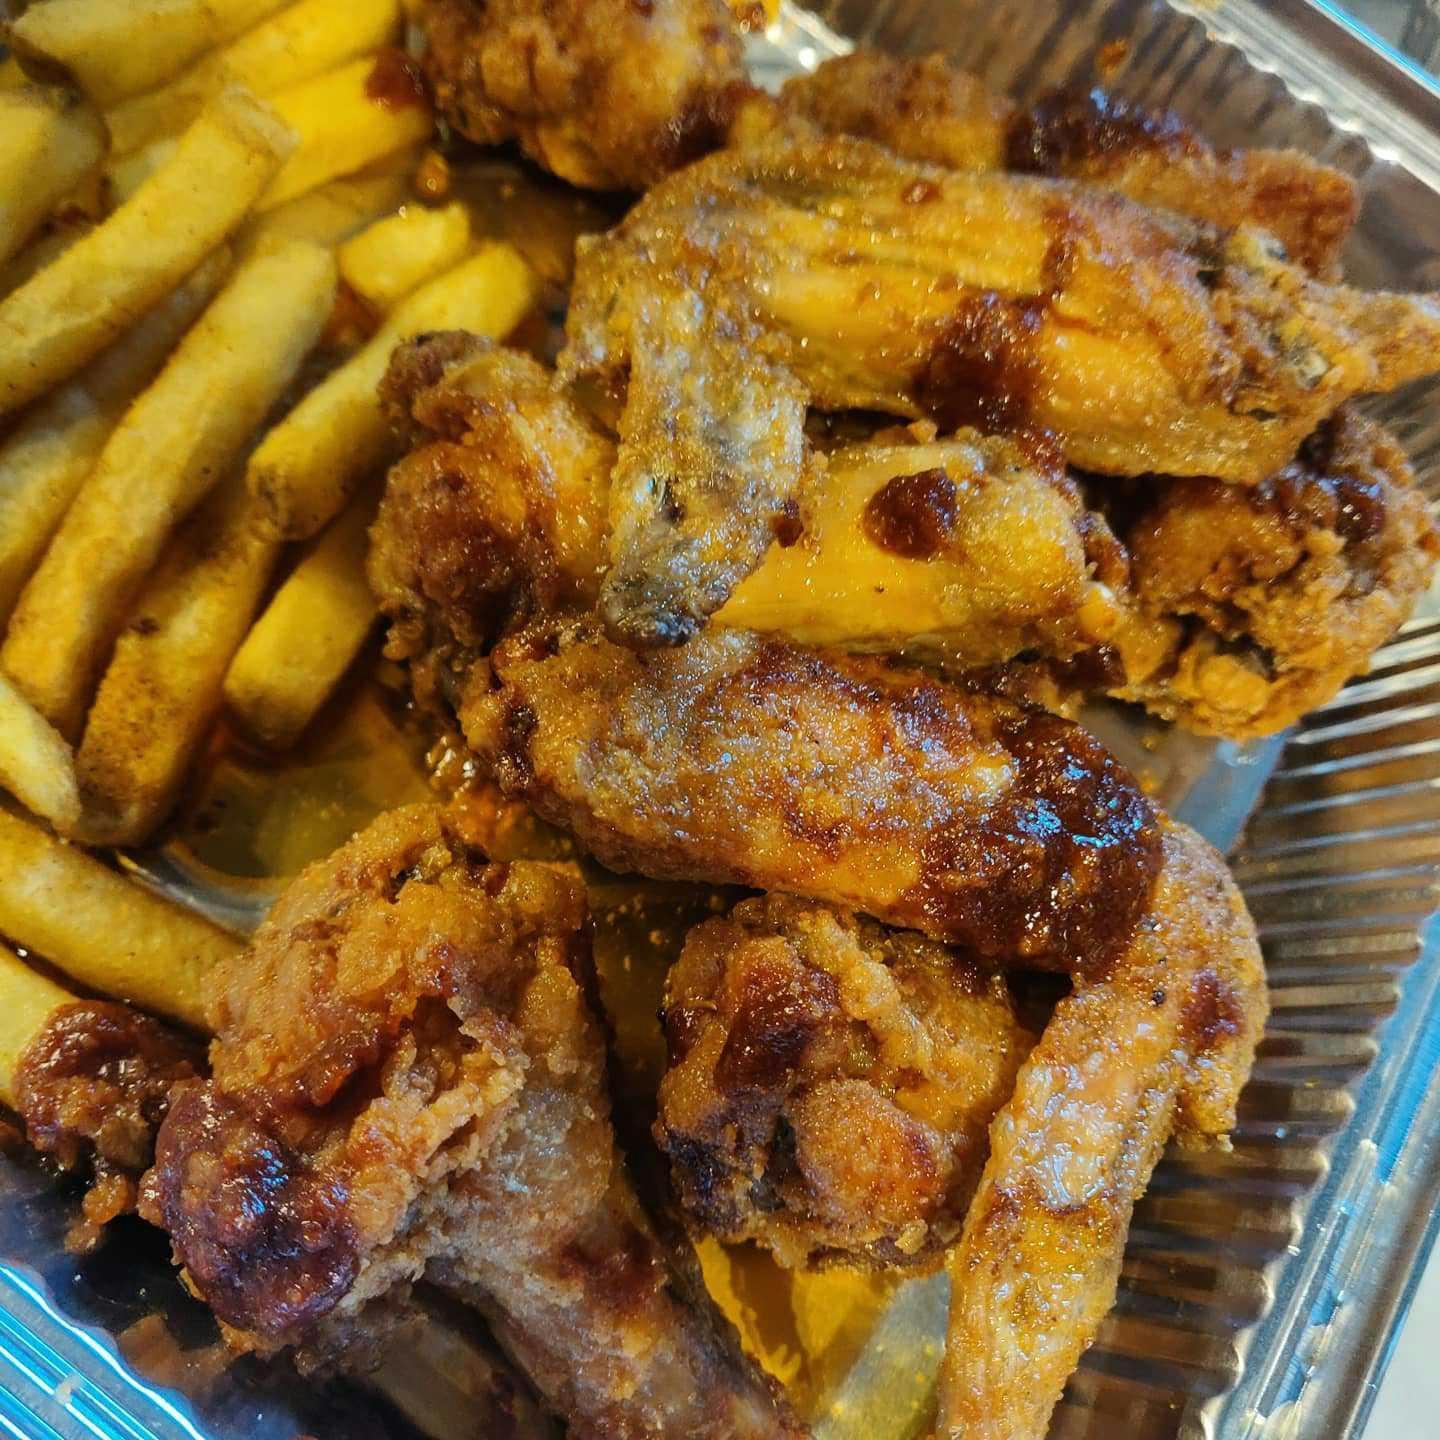 A tray of chicken wings from The Wing King's "Wing Wednesday"